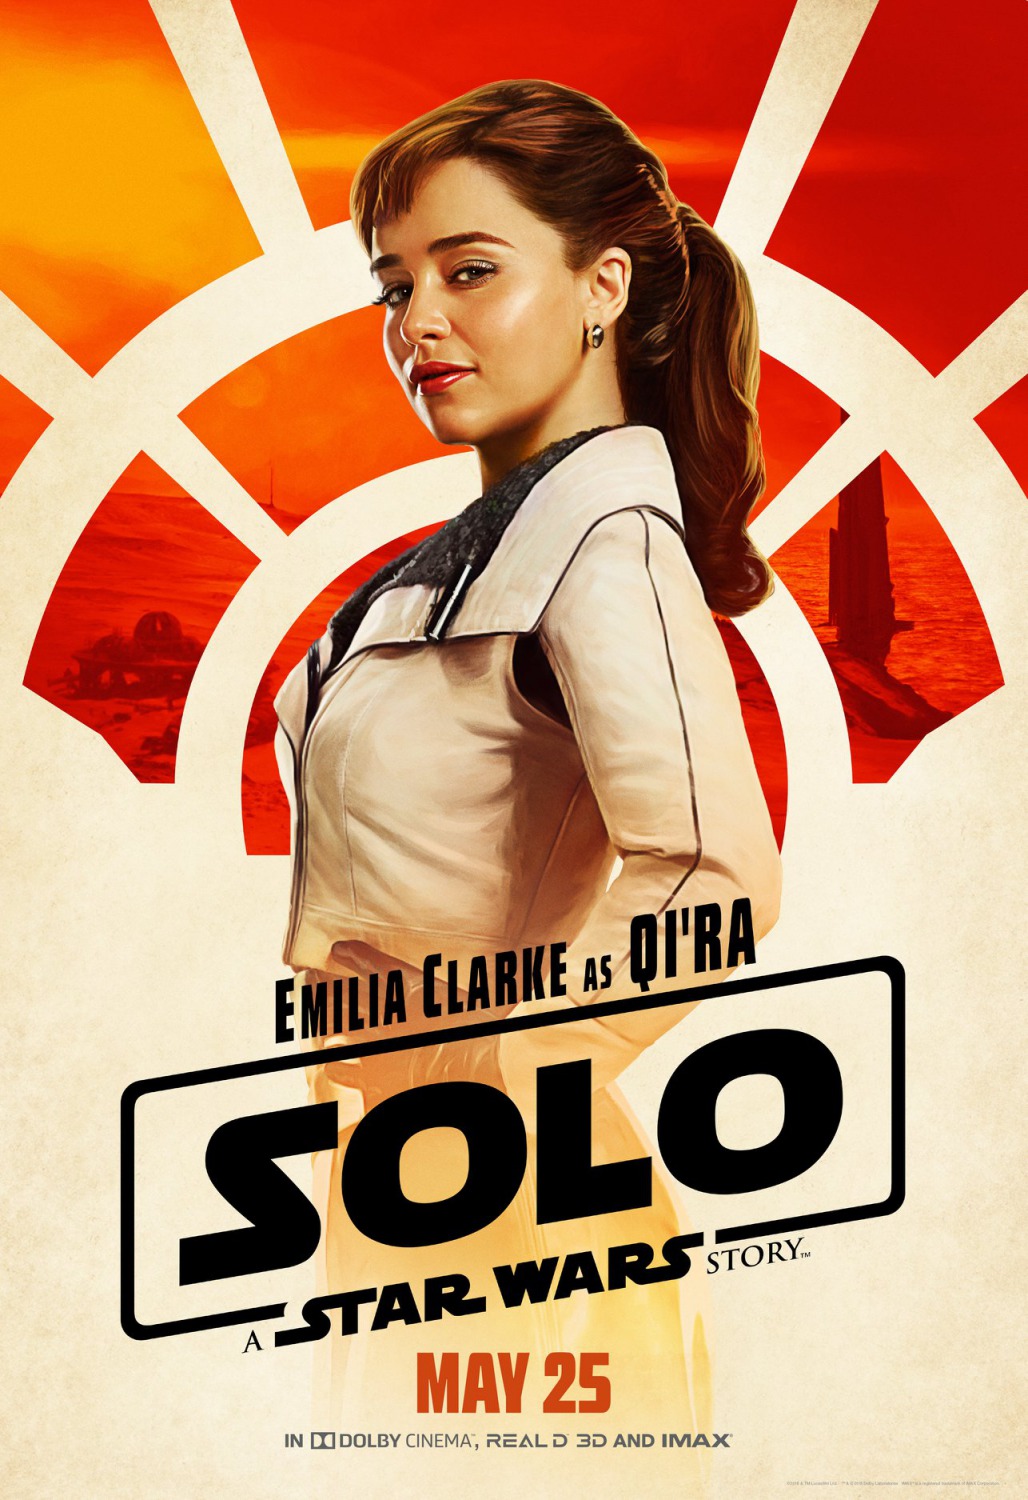 Solo A Star Wars Story All Character Poster 2018 Wallpapers